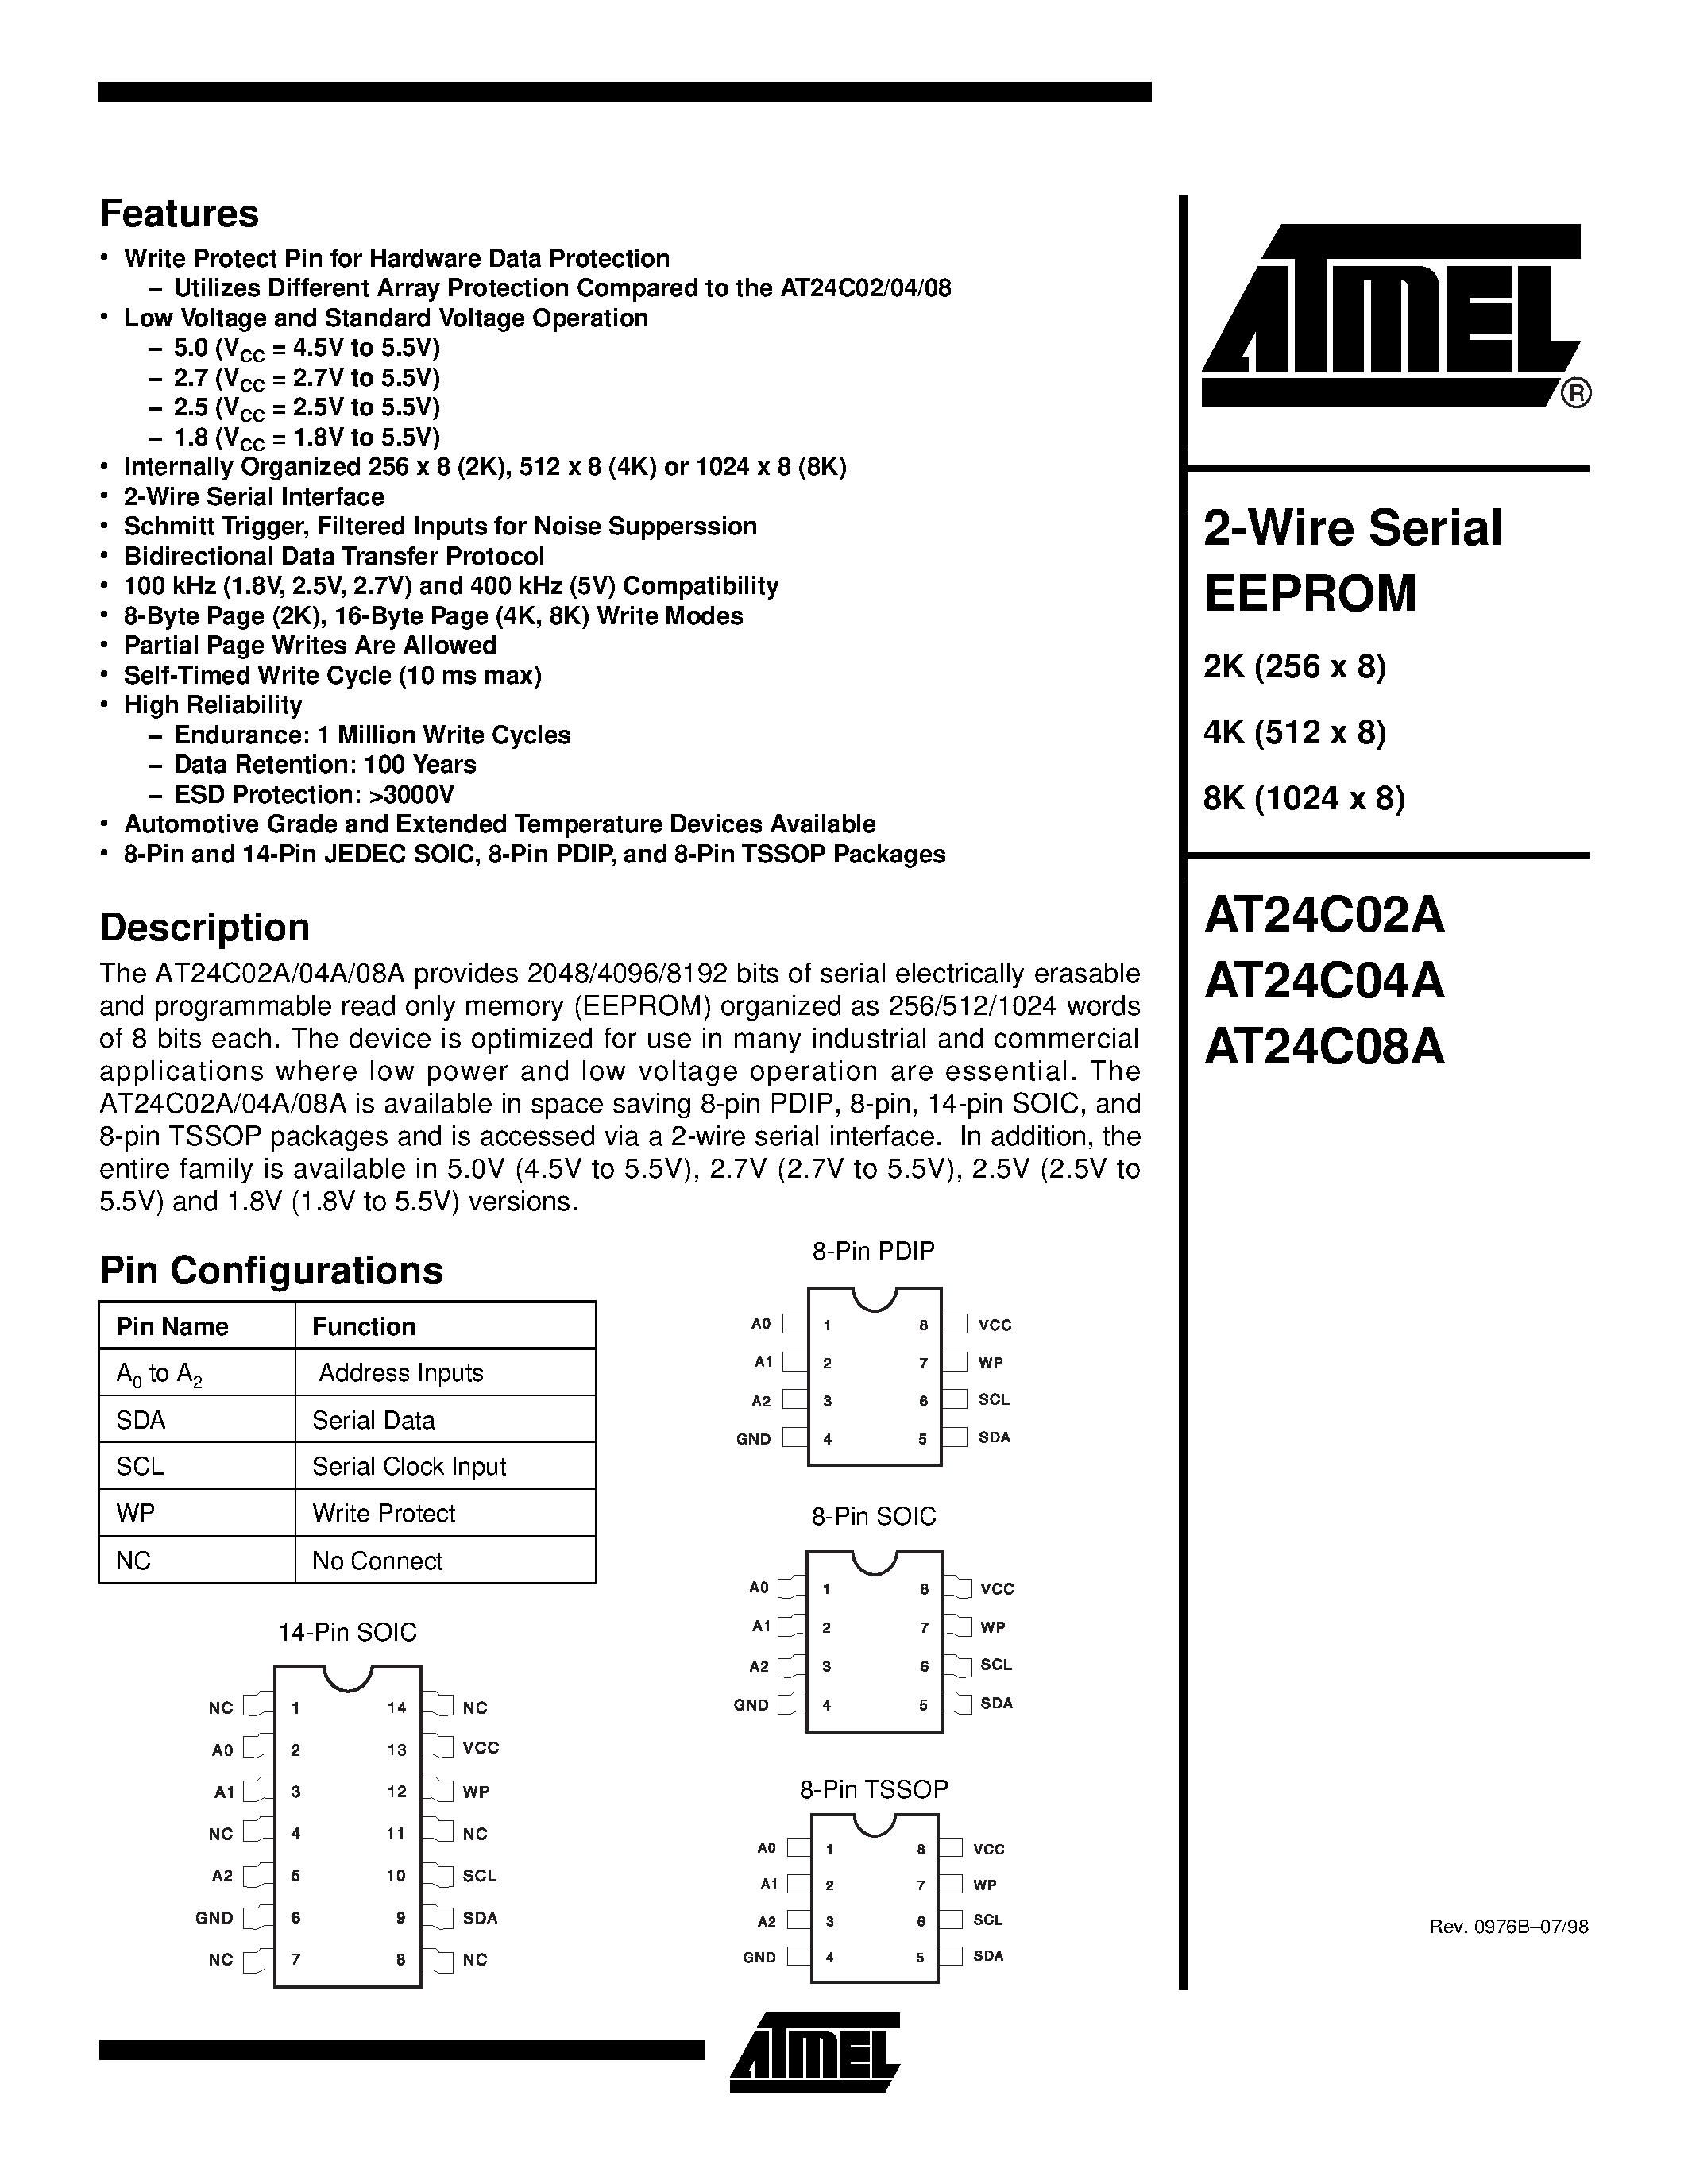 Даташит AT24C08A-10PC-2.7 - 2-Wire Serial EEPROM страница 1